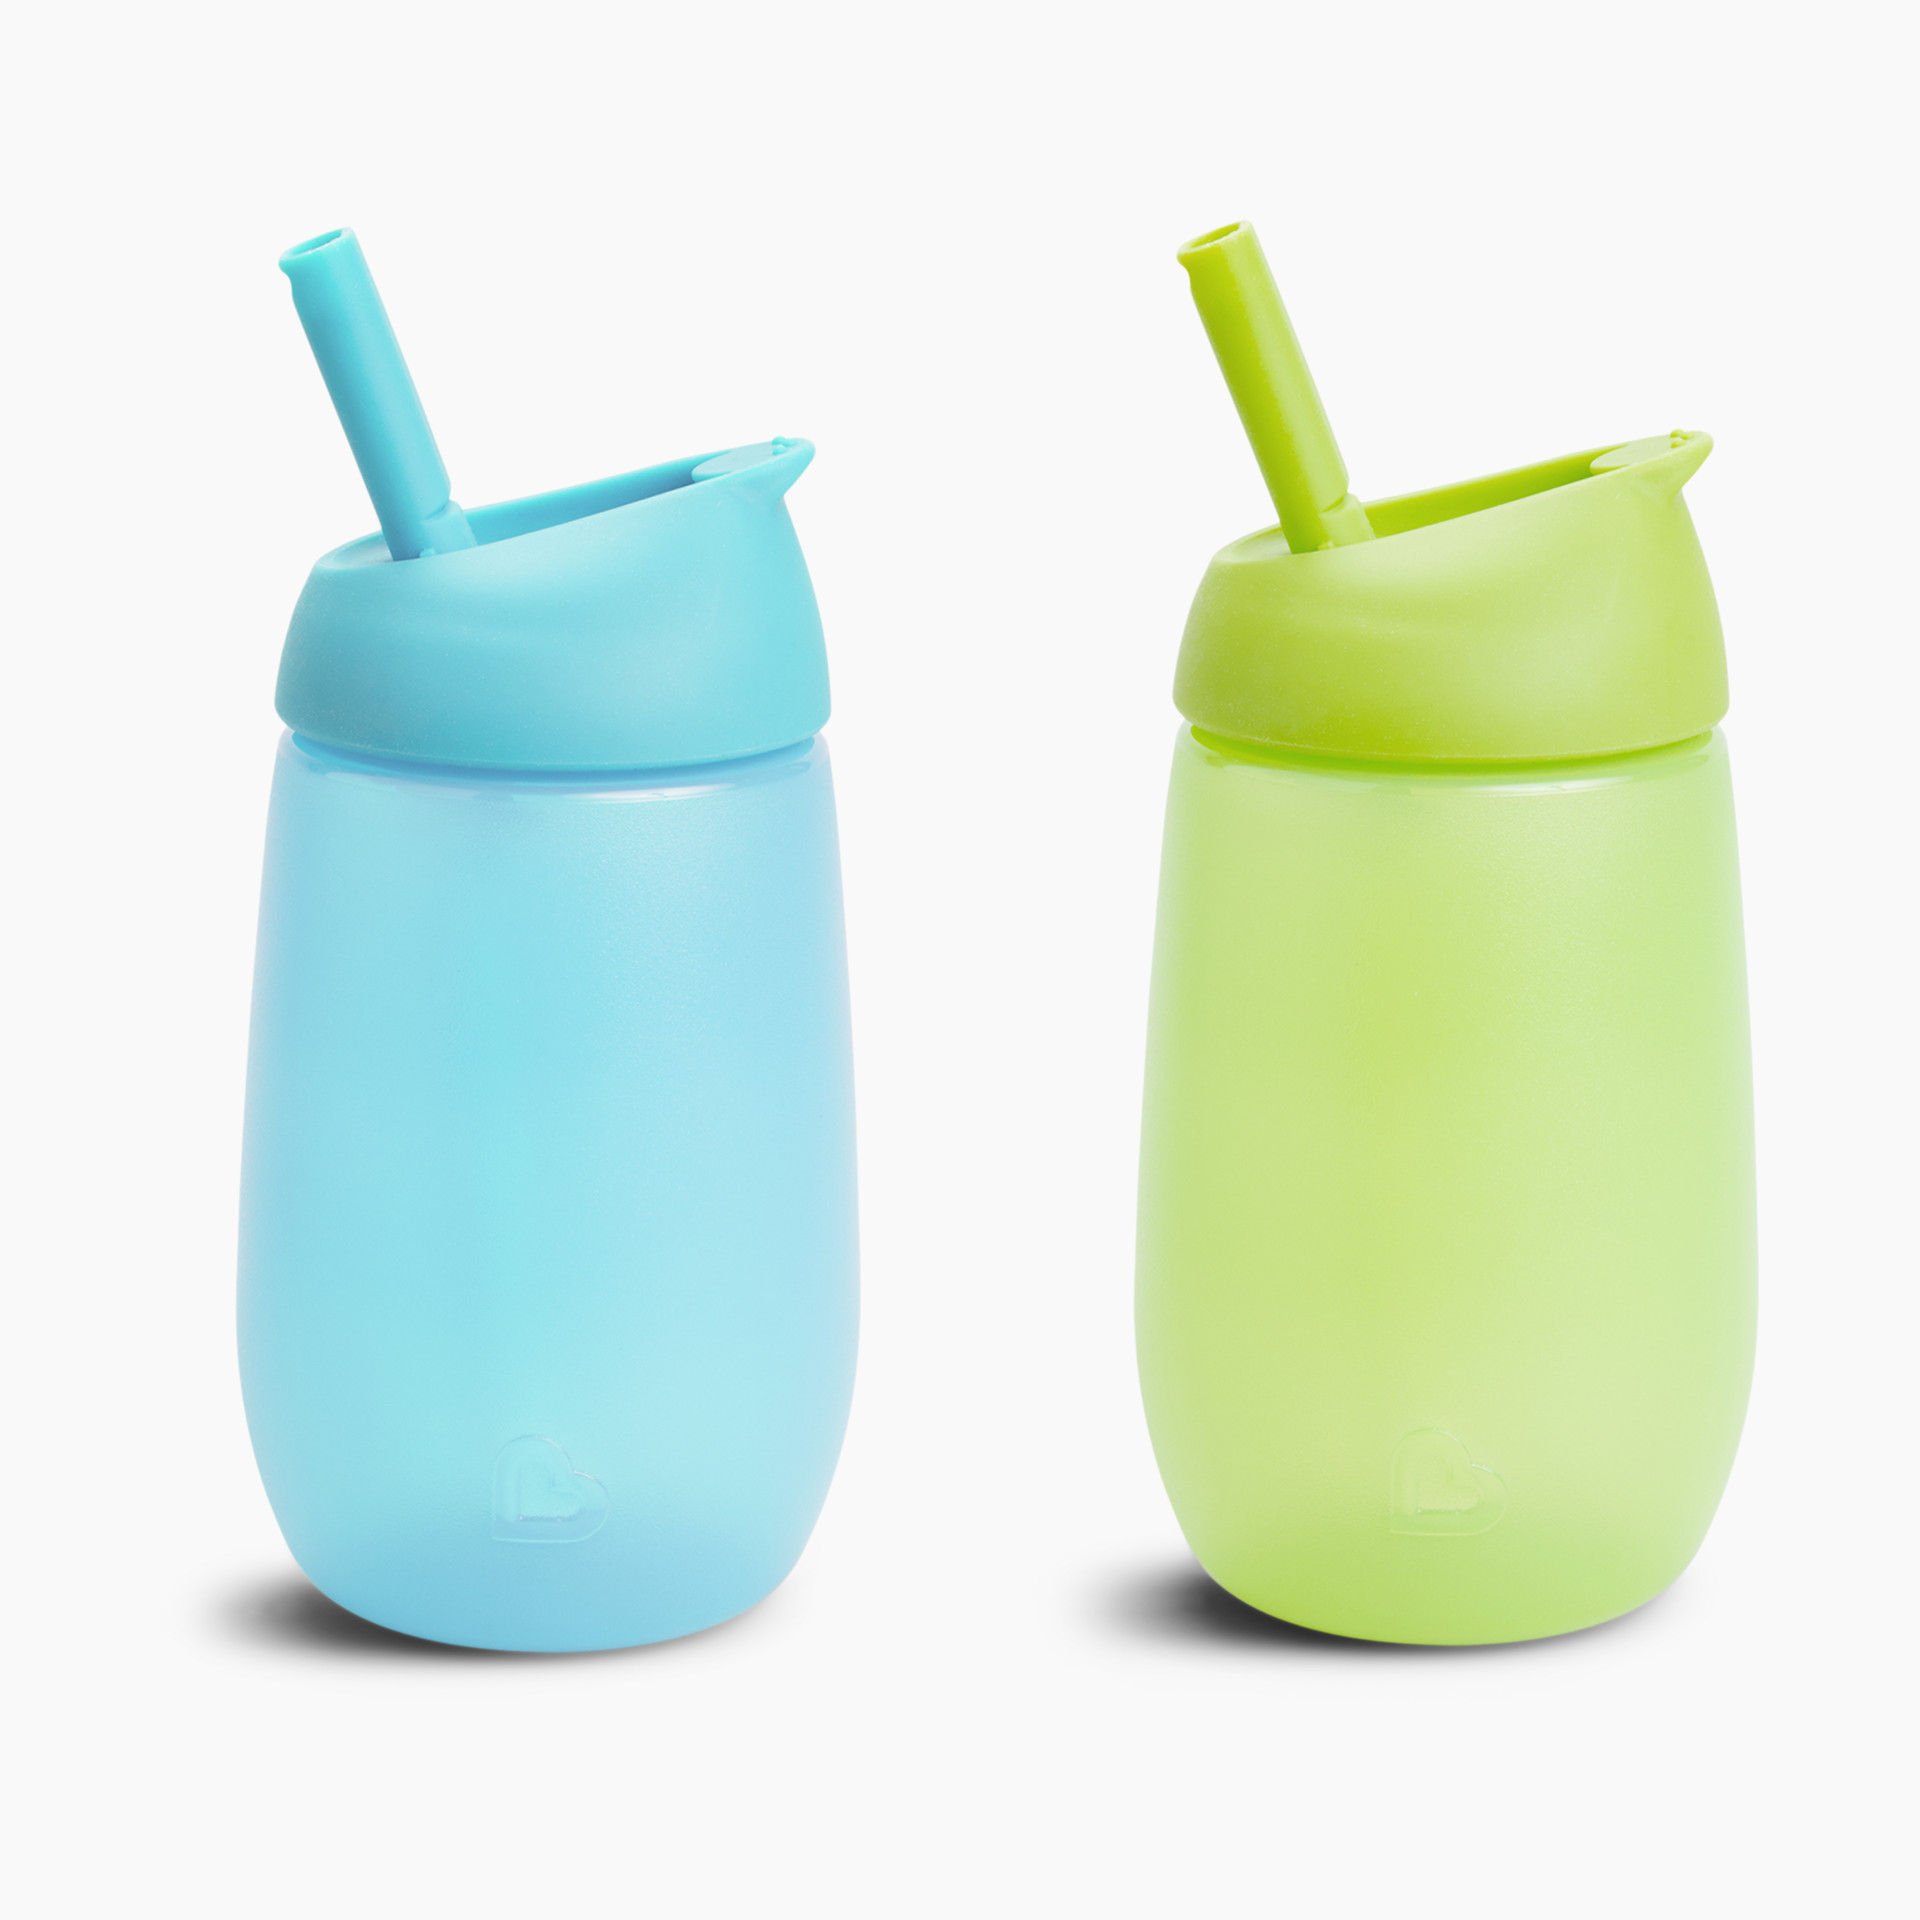 Munchkin Miracle 360 Sippy Cup, Green/Blue, 10 oz, 2 Count